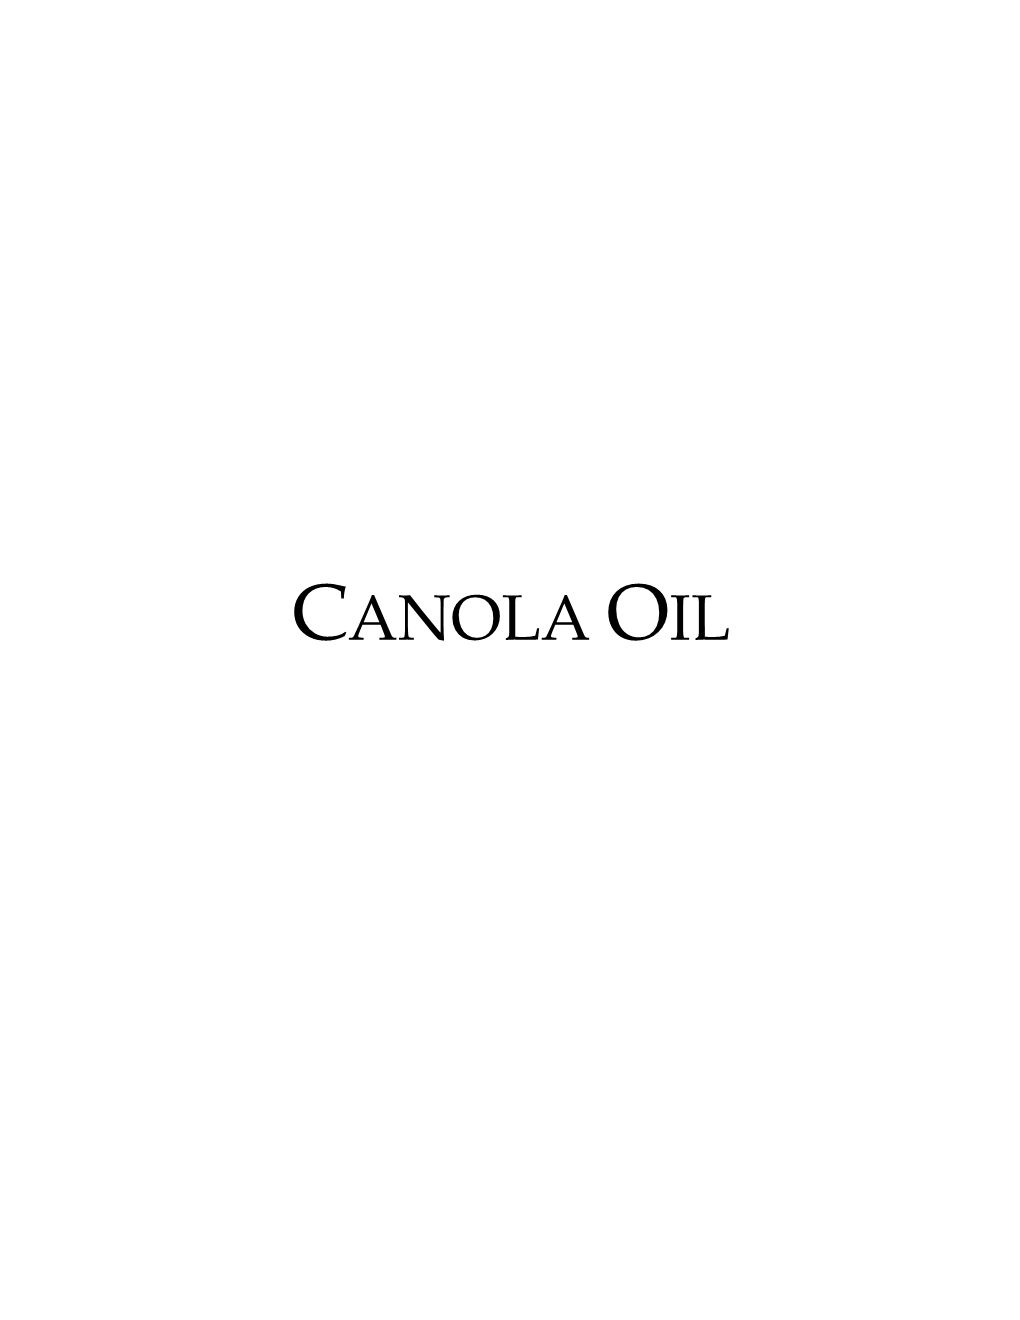 The Culinary Institute of America and Canola Info